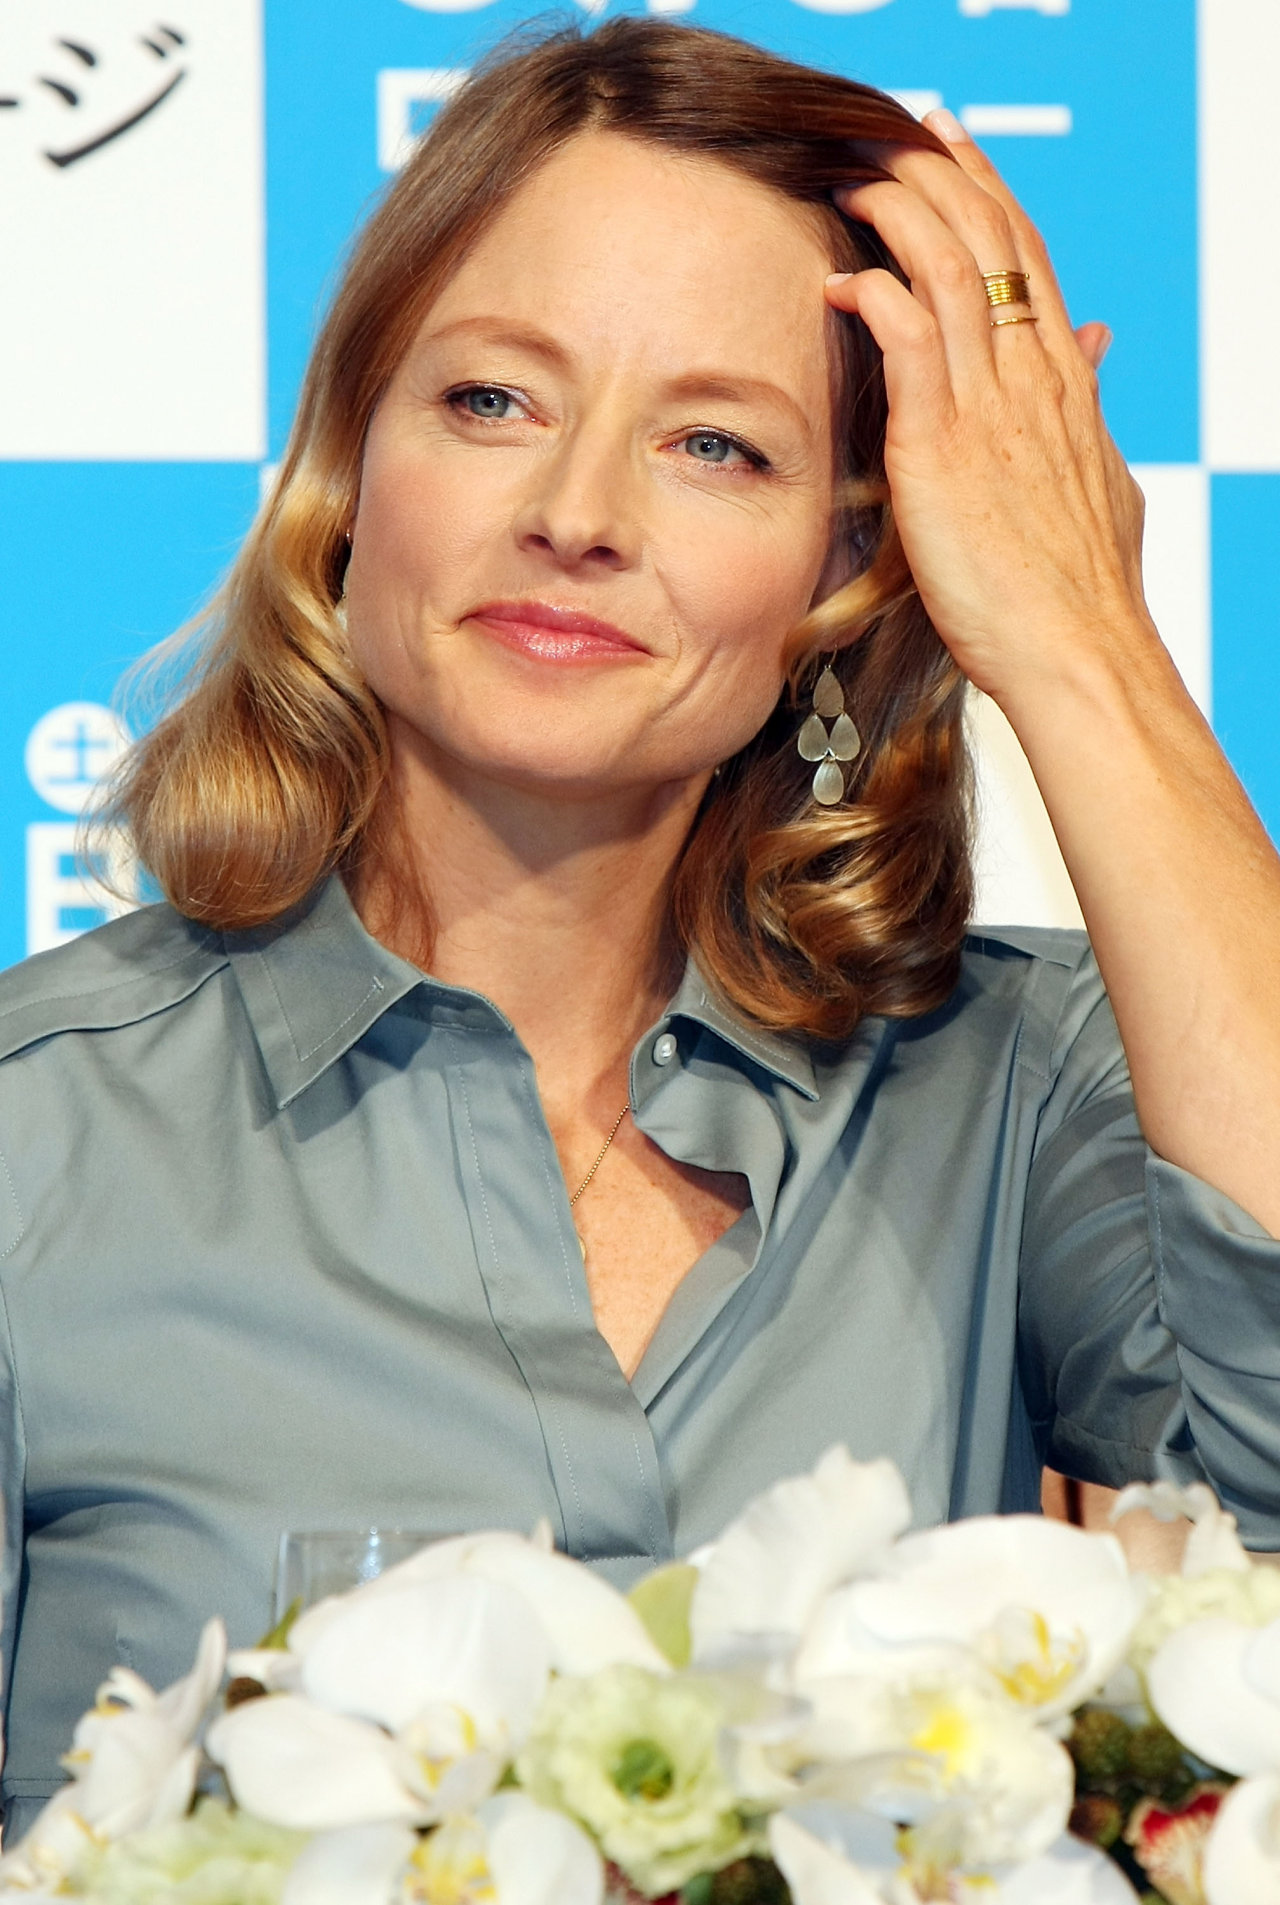 Jodie Foster leaked wallpapers